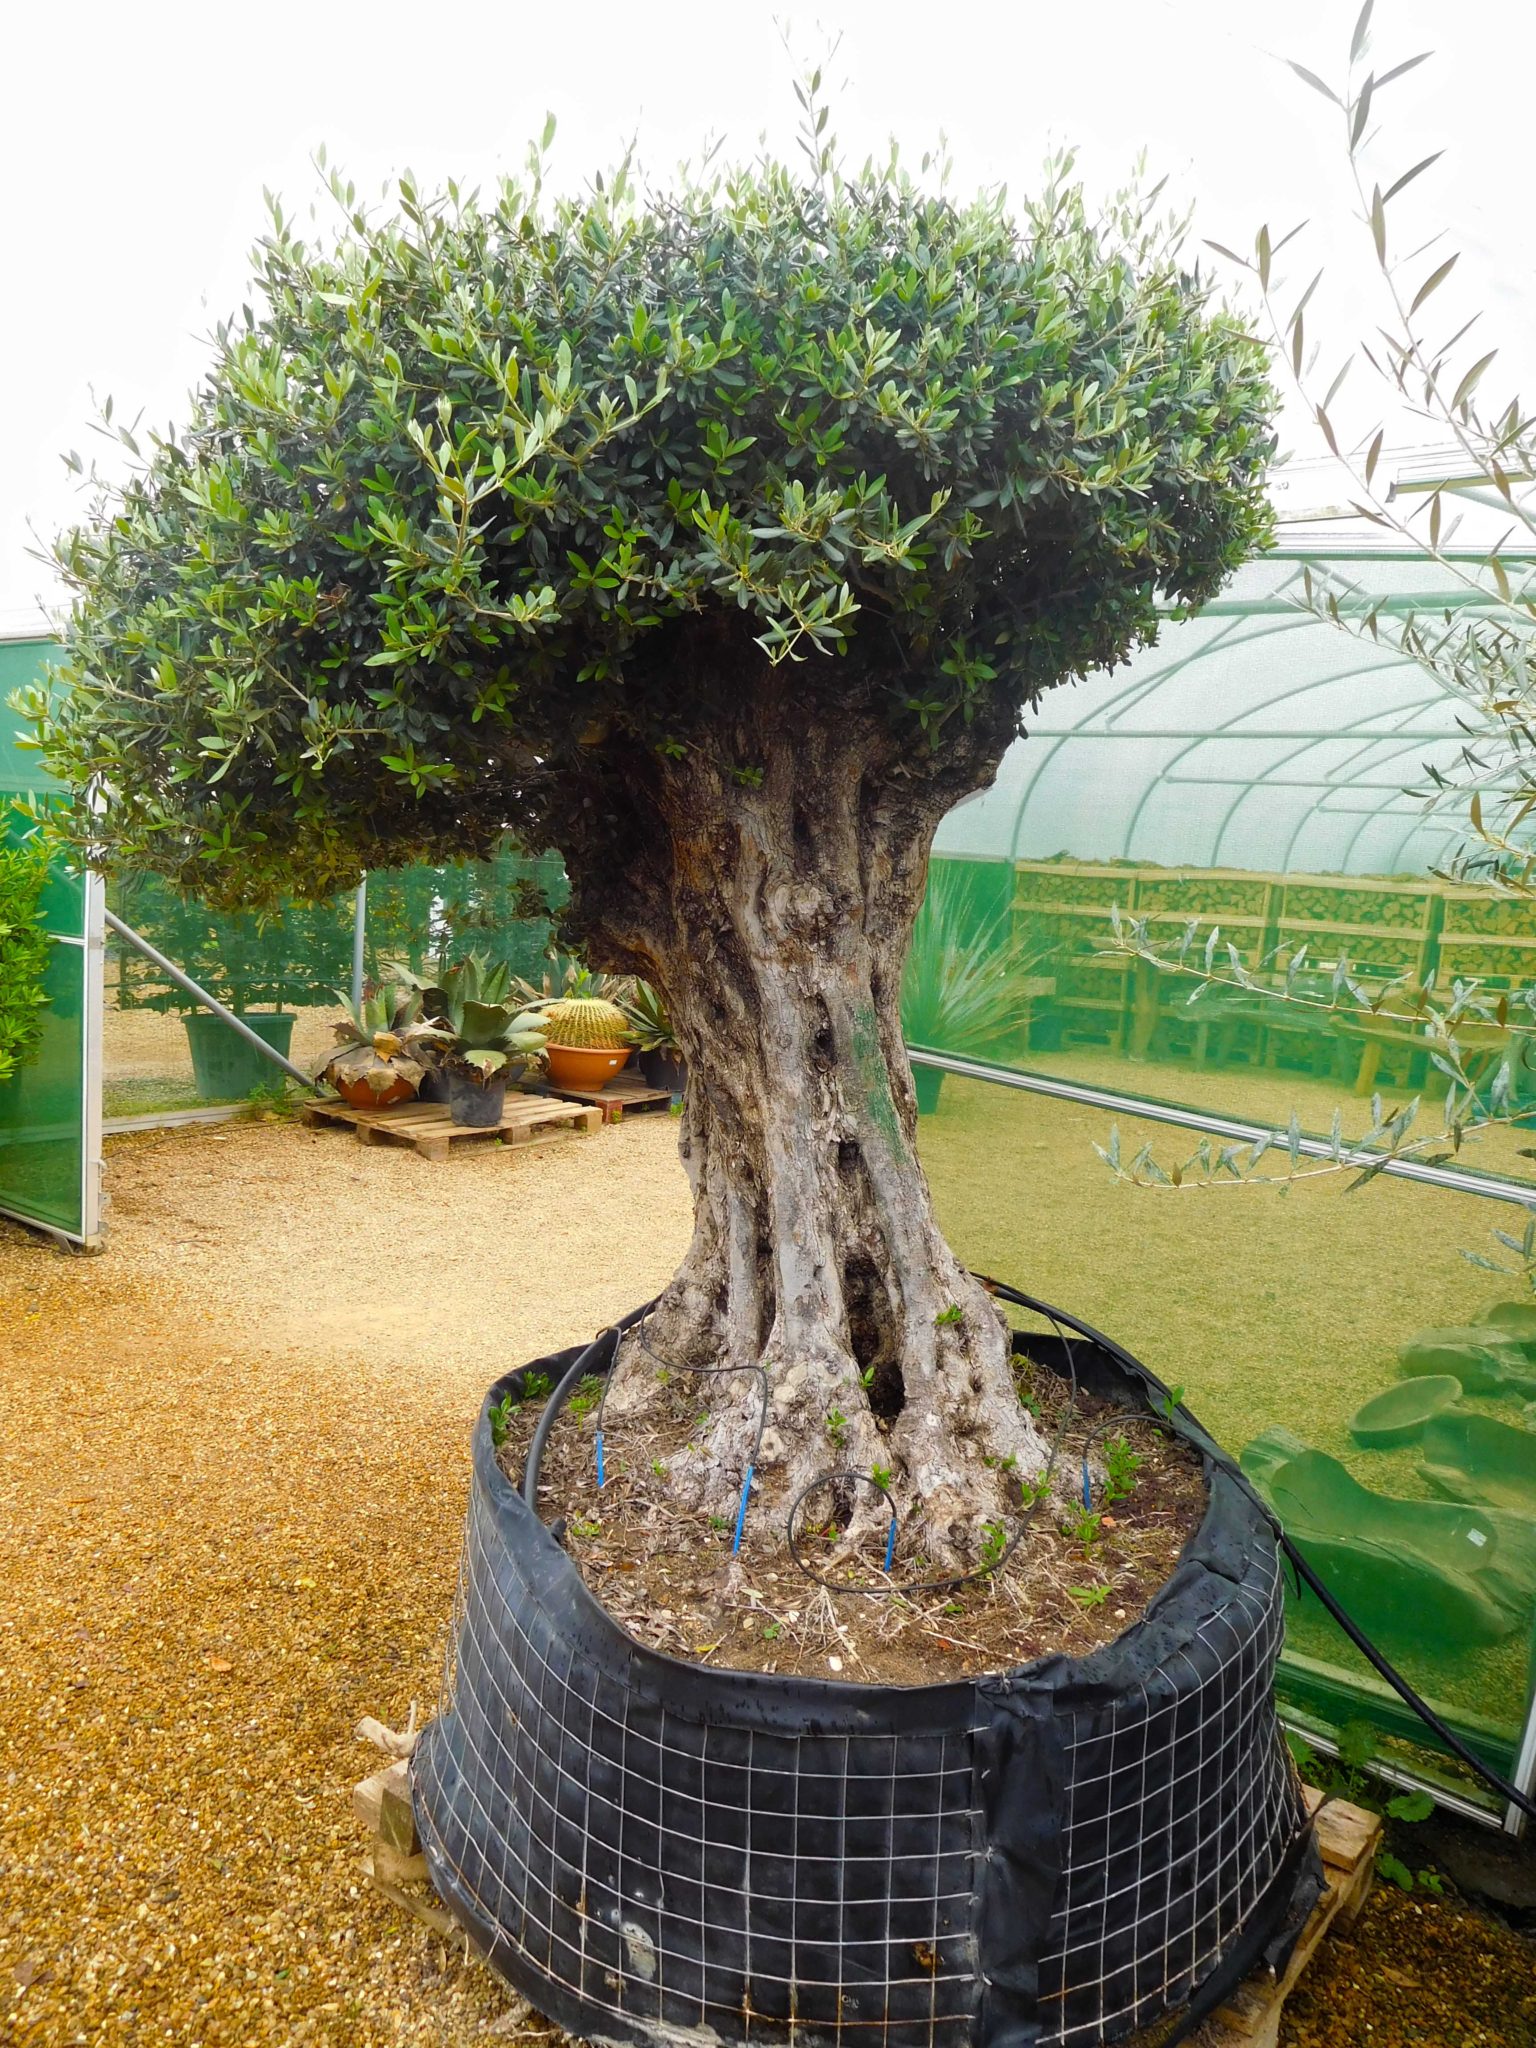 Flat Top 'Lechin' Olive Tree No.157 | Olive Trees for sale UK ...